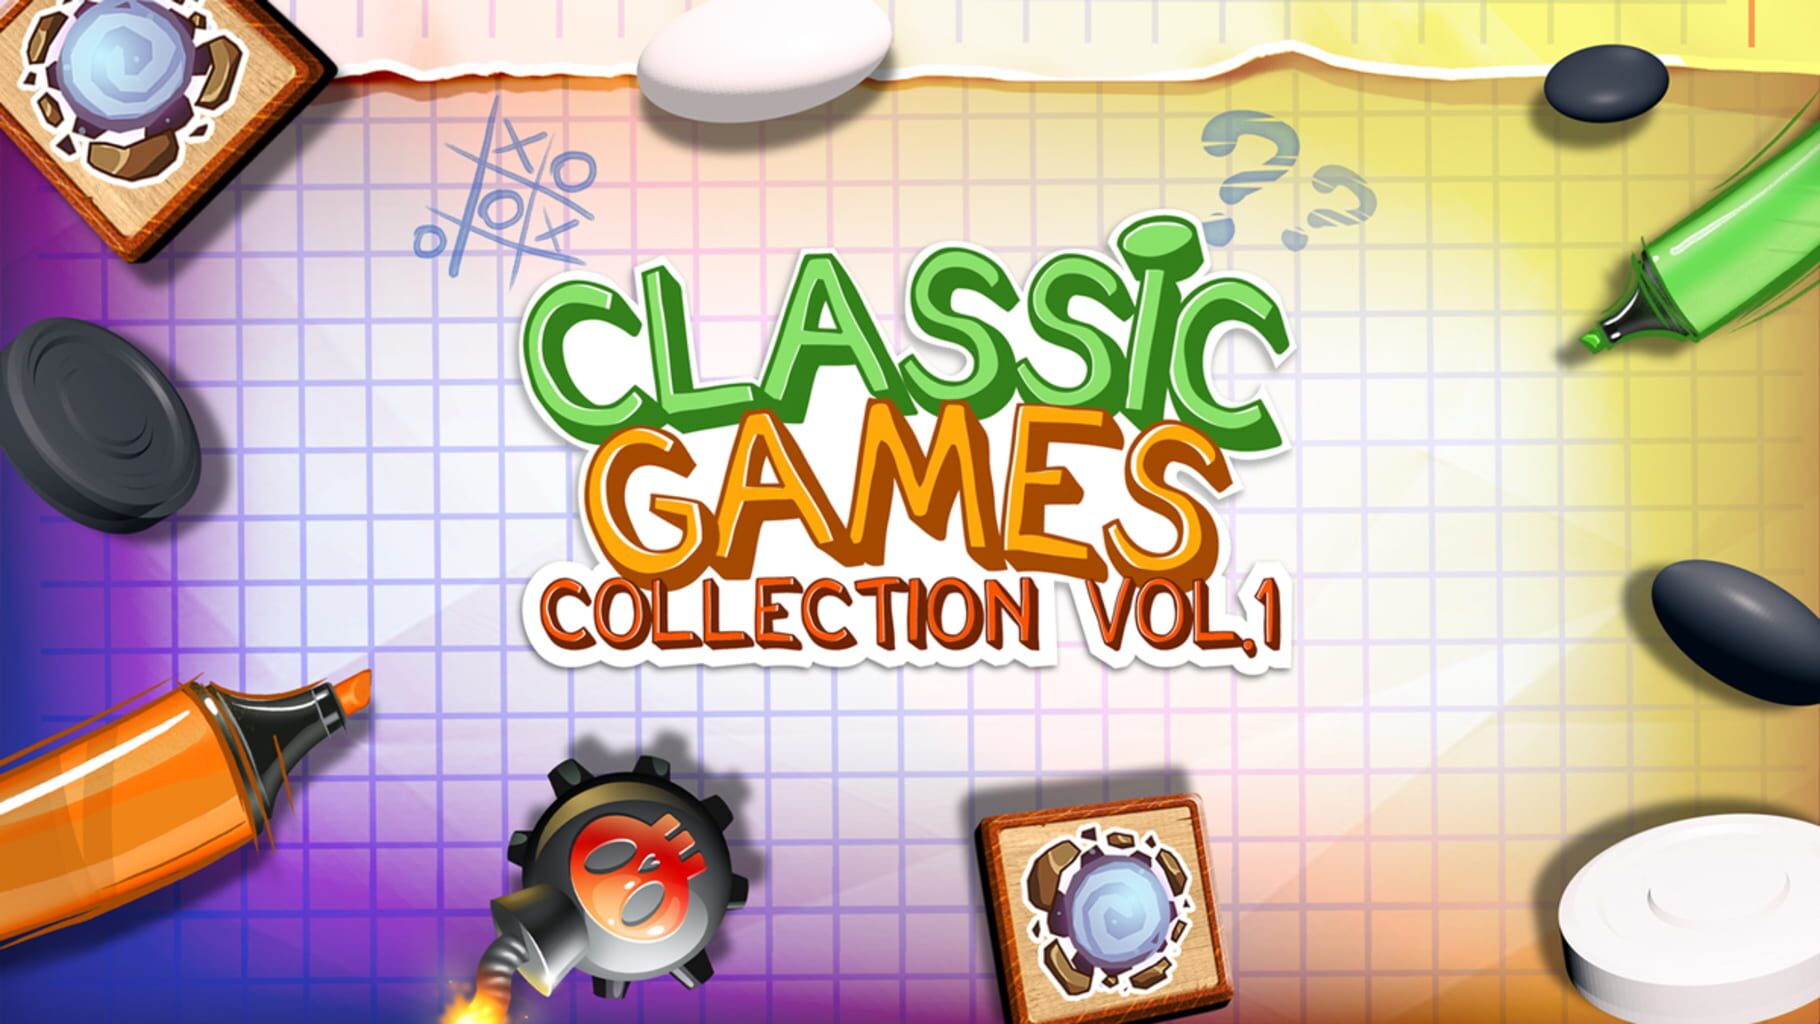 Classic Games Collection Vol. 1 artwork